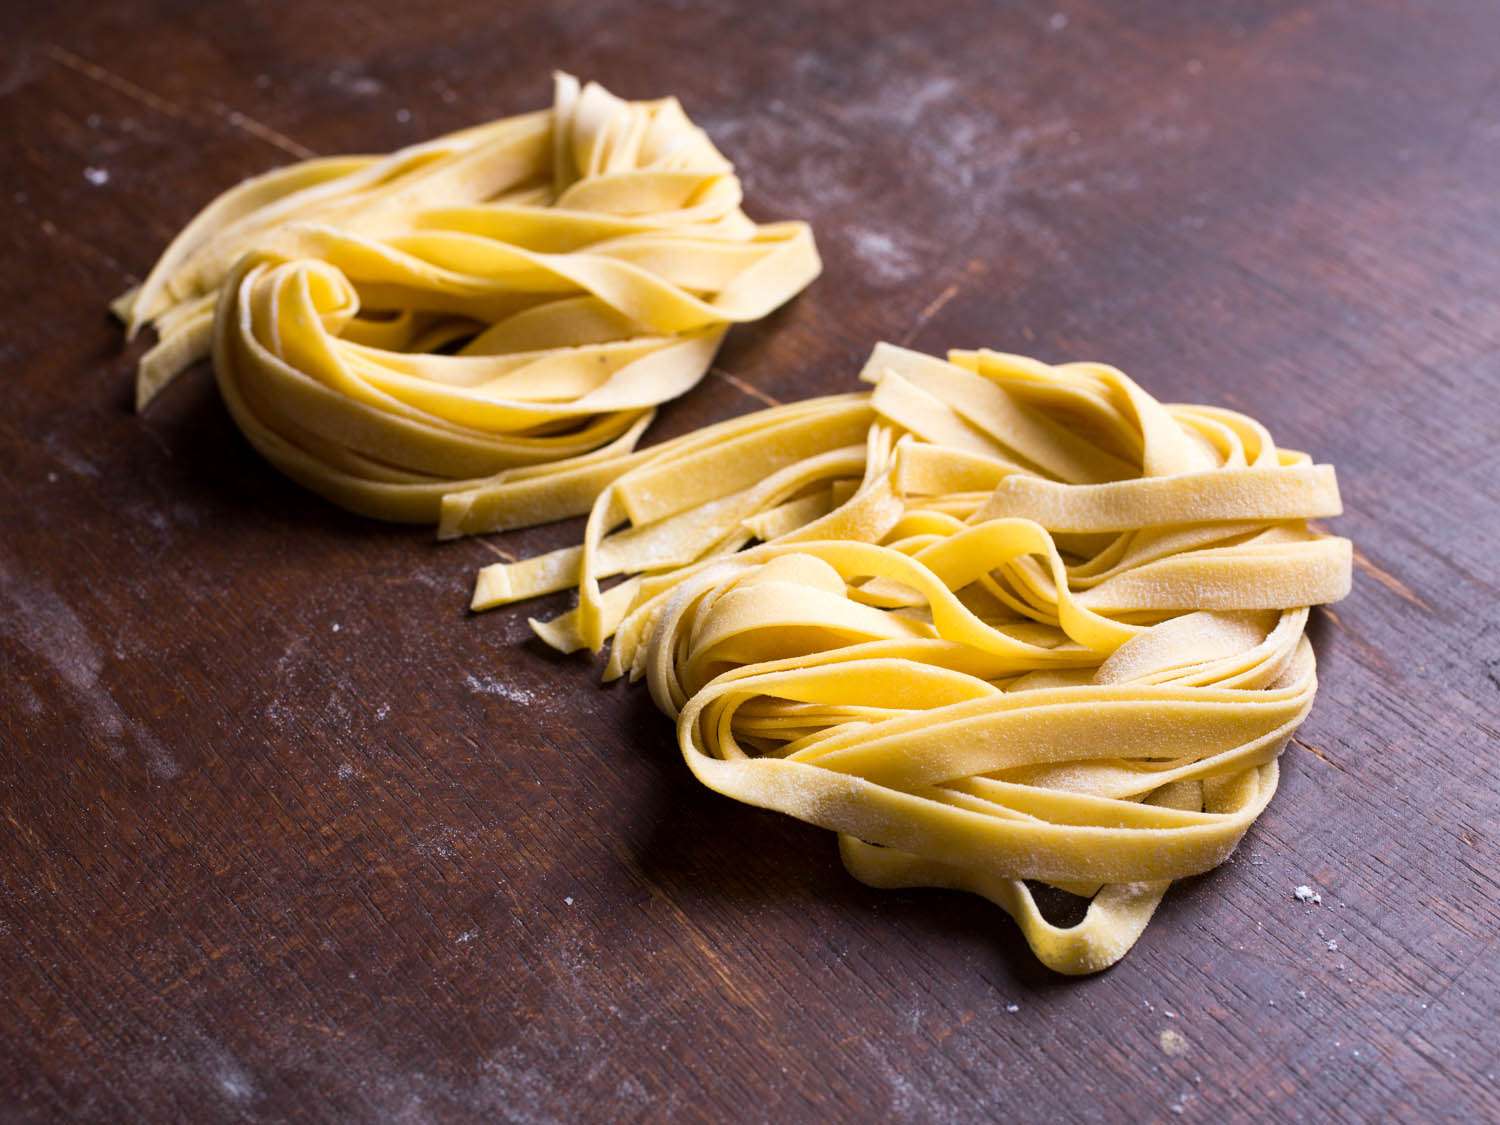 Nests of fresh pasta ribbons on a wooden surface